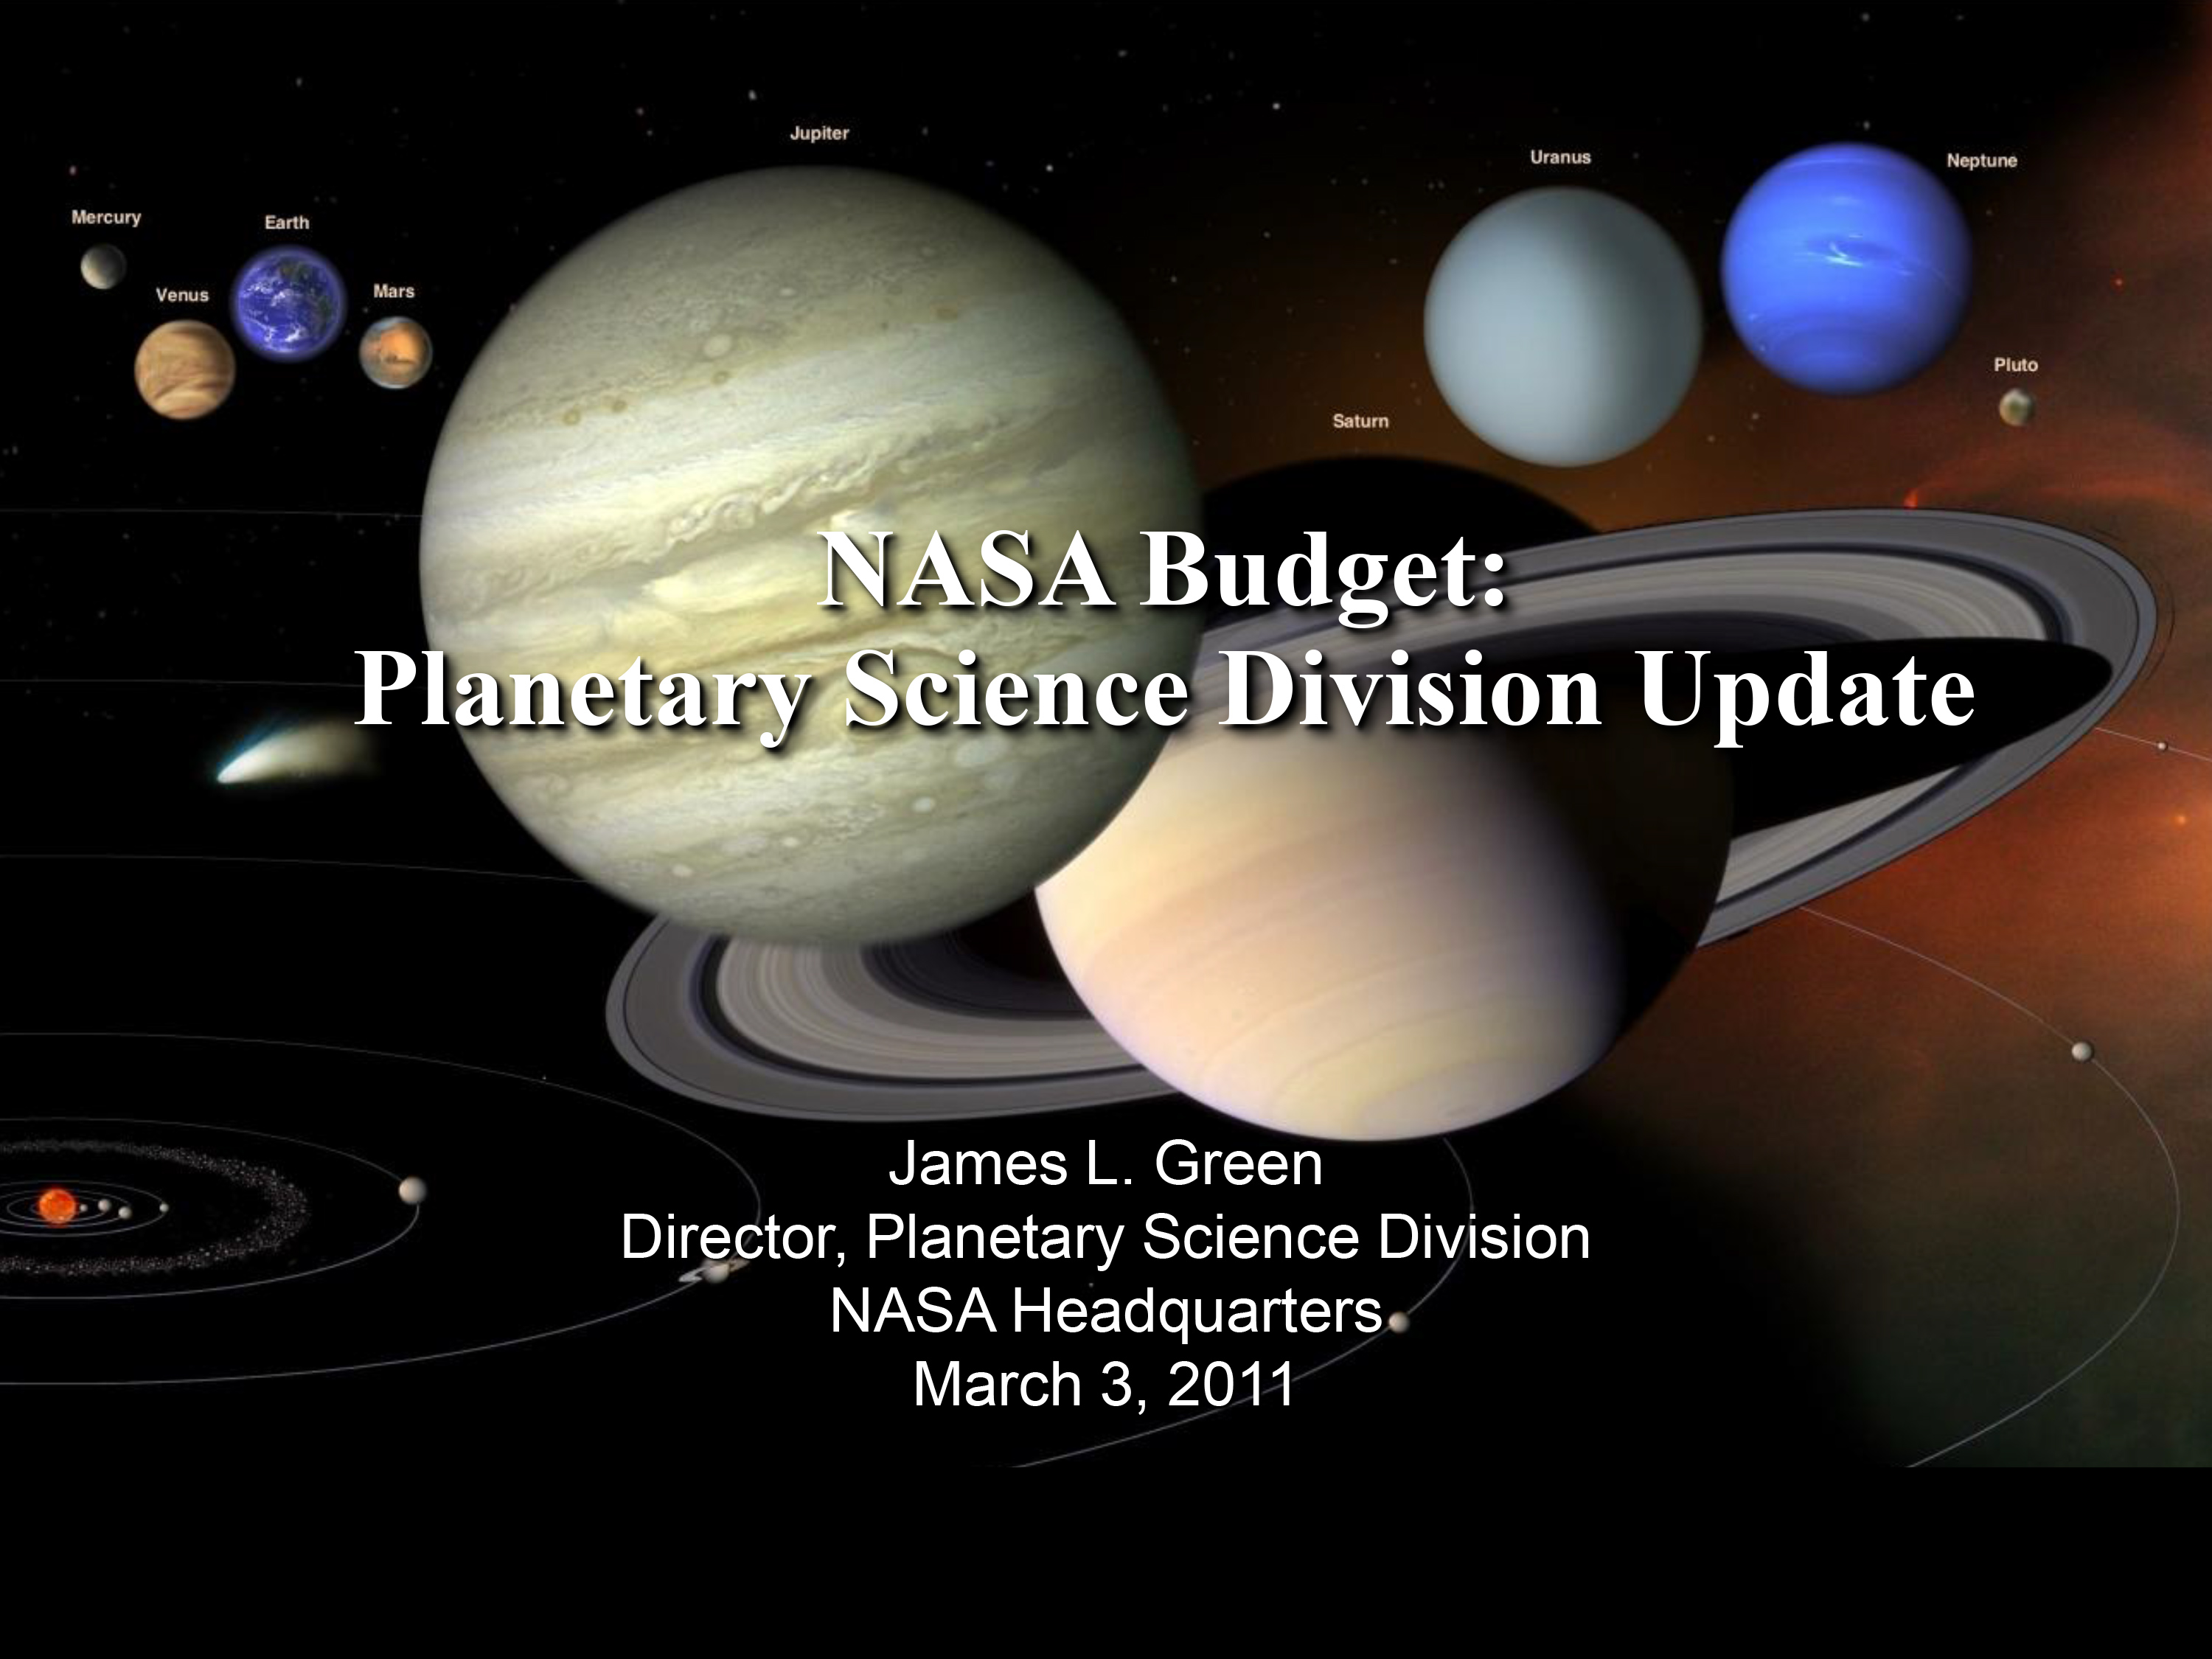 Presentation by Planetary Science Division Director Dr. James Green.